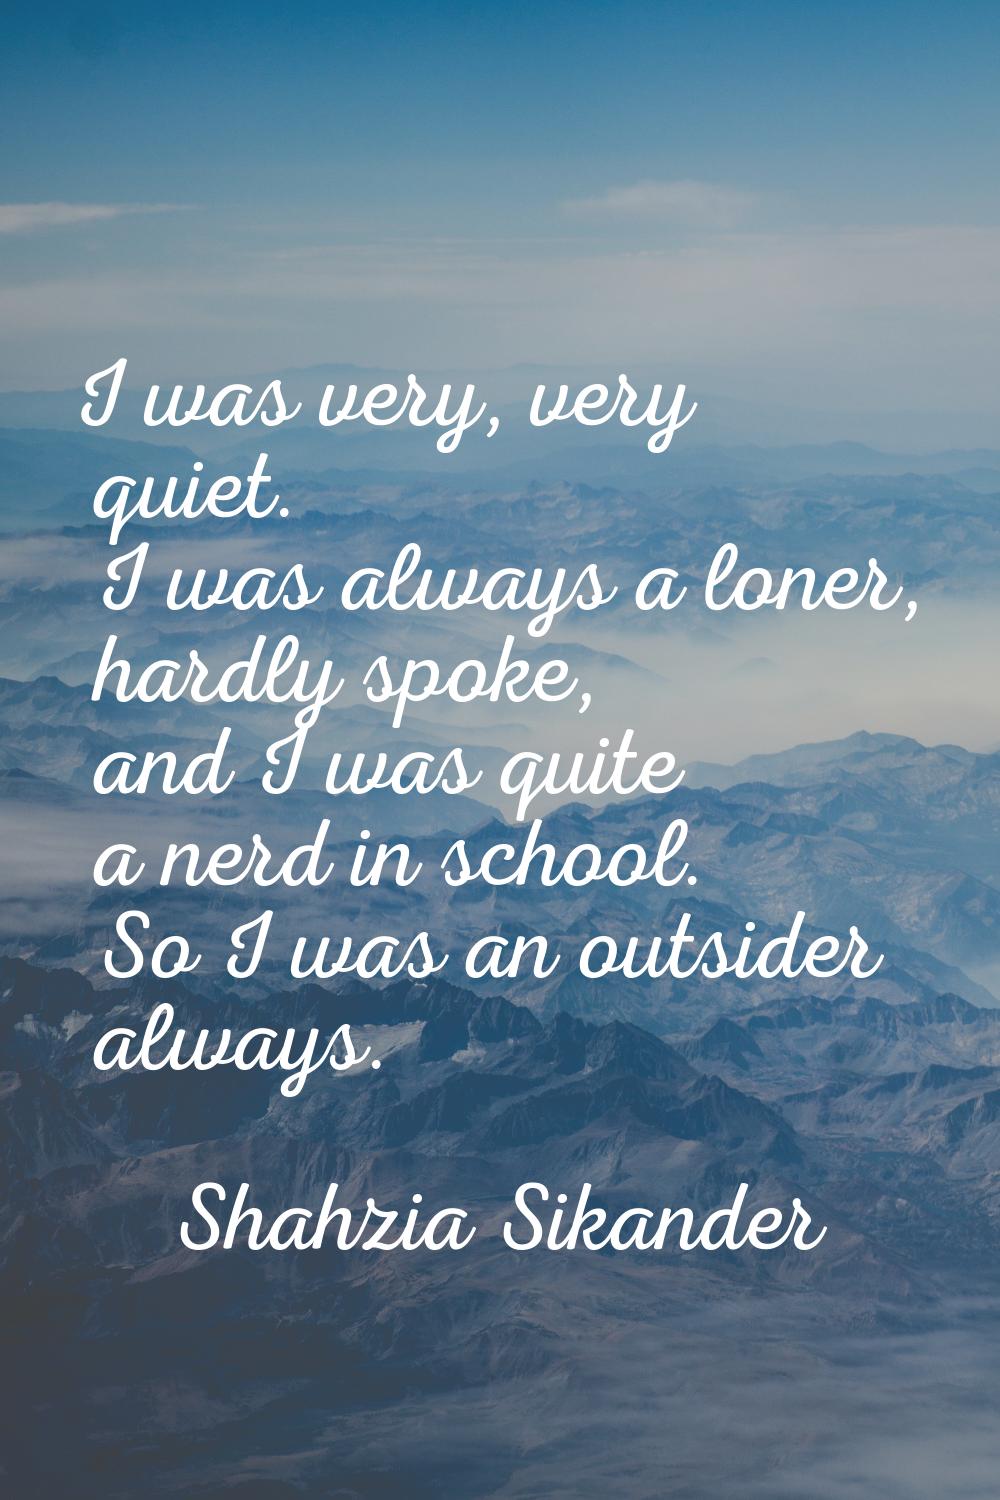 I was very, very quiet. I was always a loner, hardly spoke, and I was quite a nerd in school. So I 